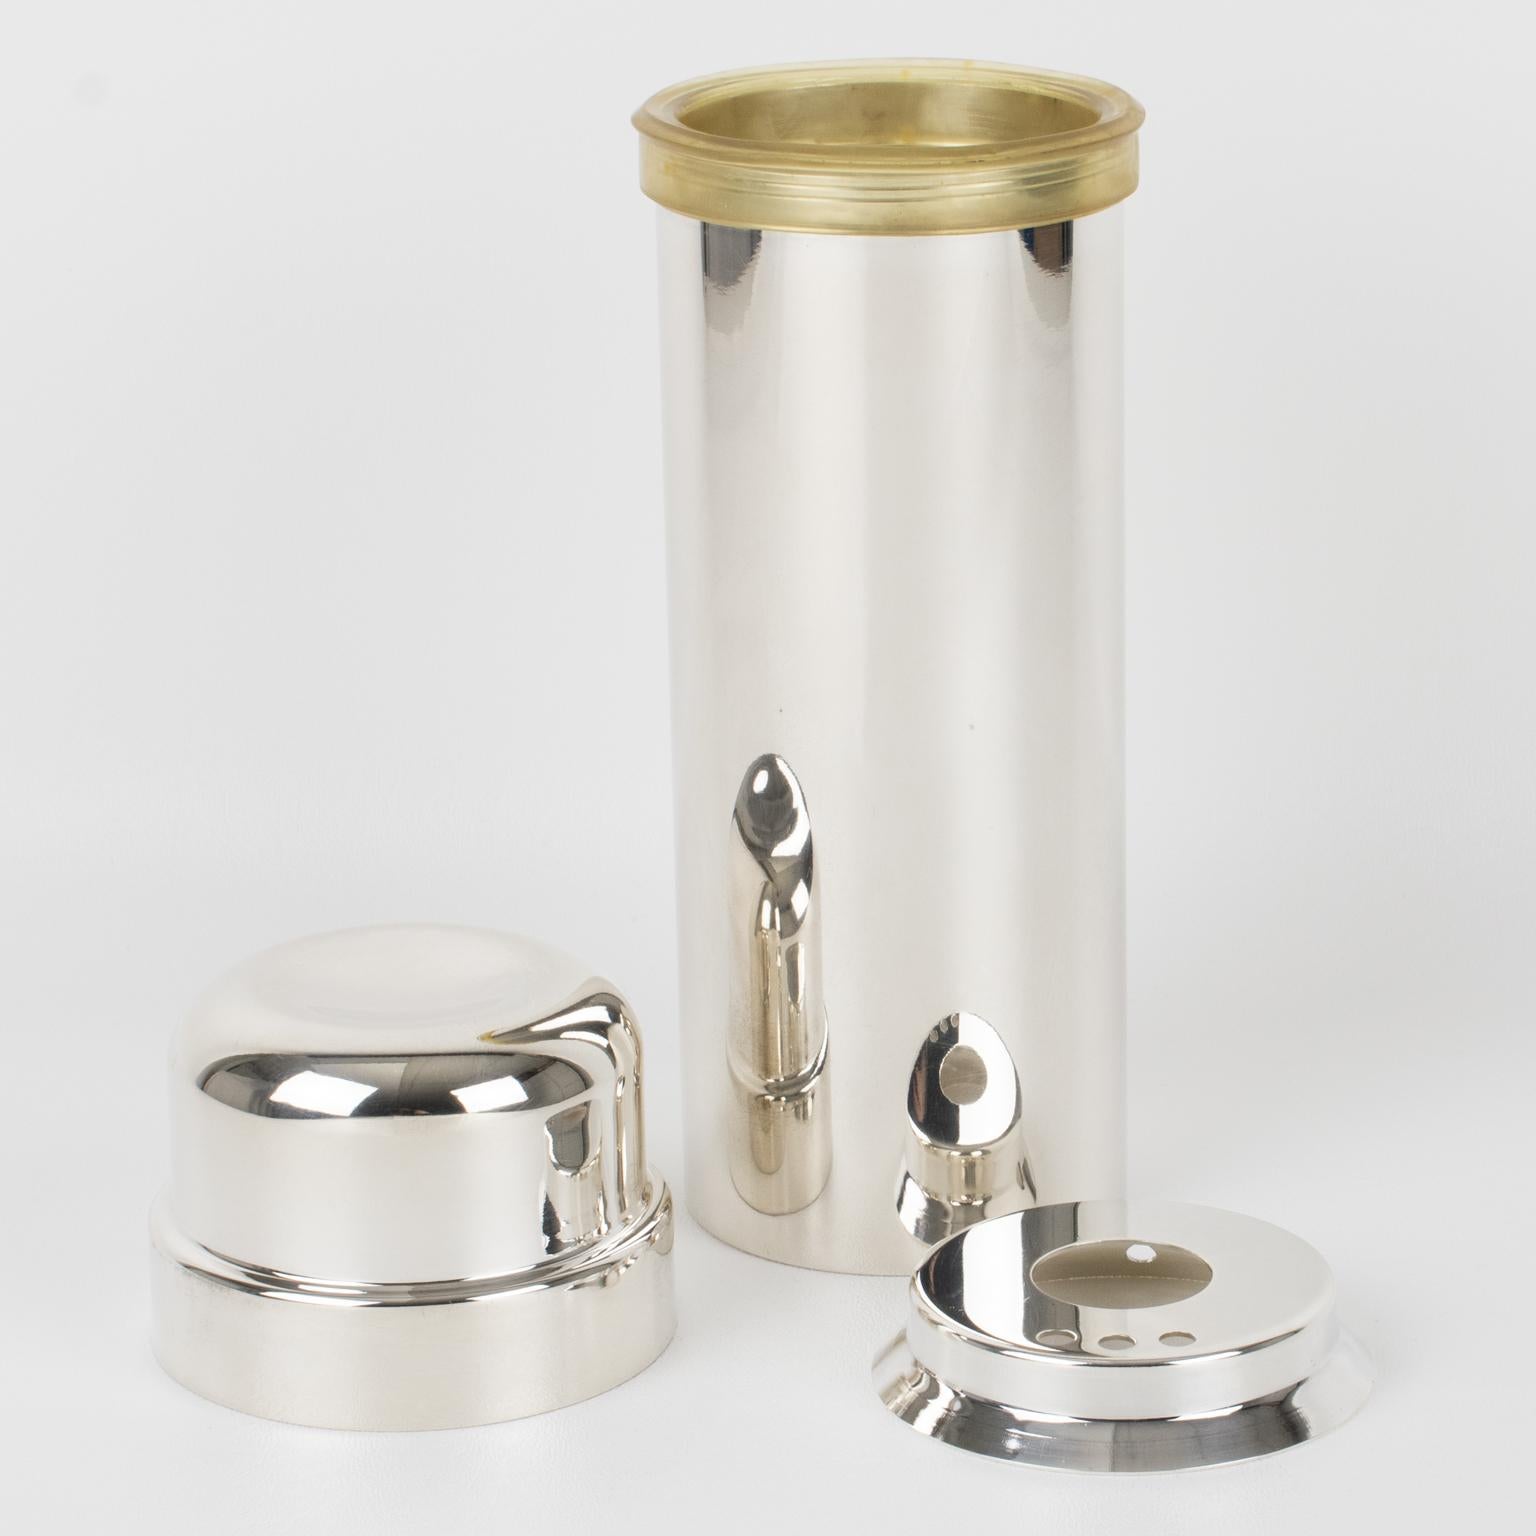 Modernist silver plate cylindrical cocktail or Martini shaker designed by PM, Italy. Two-sectioned designed cocktail shaker with removable cap and internal strainer. The piece boasts a lovely minimalist tumbler shape. The marking underside reads 